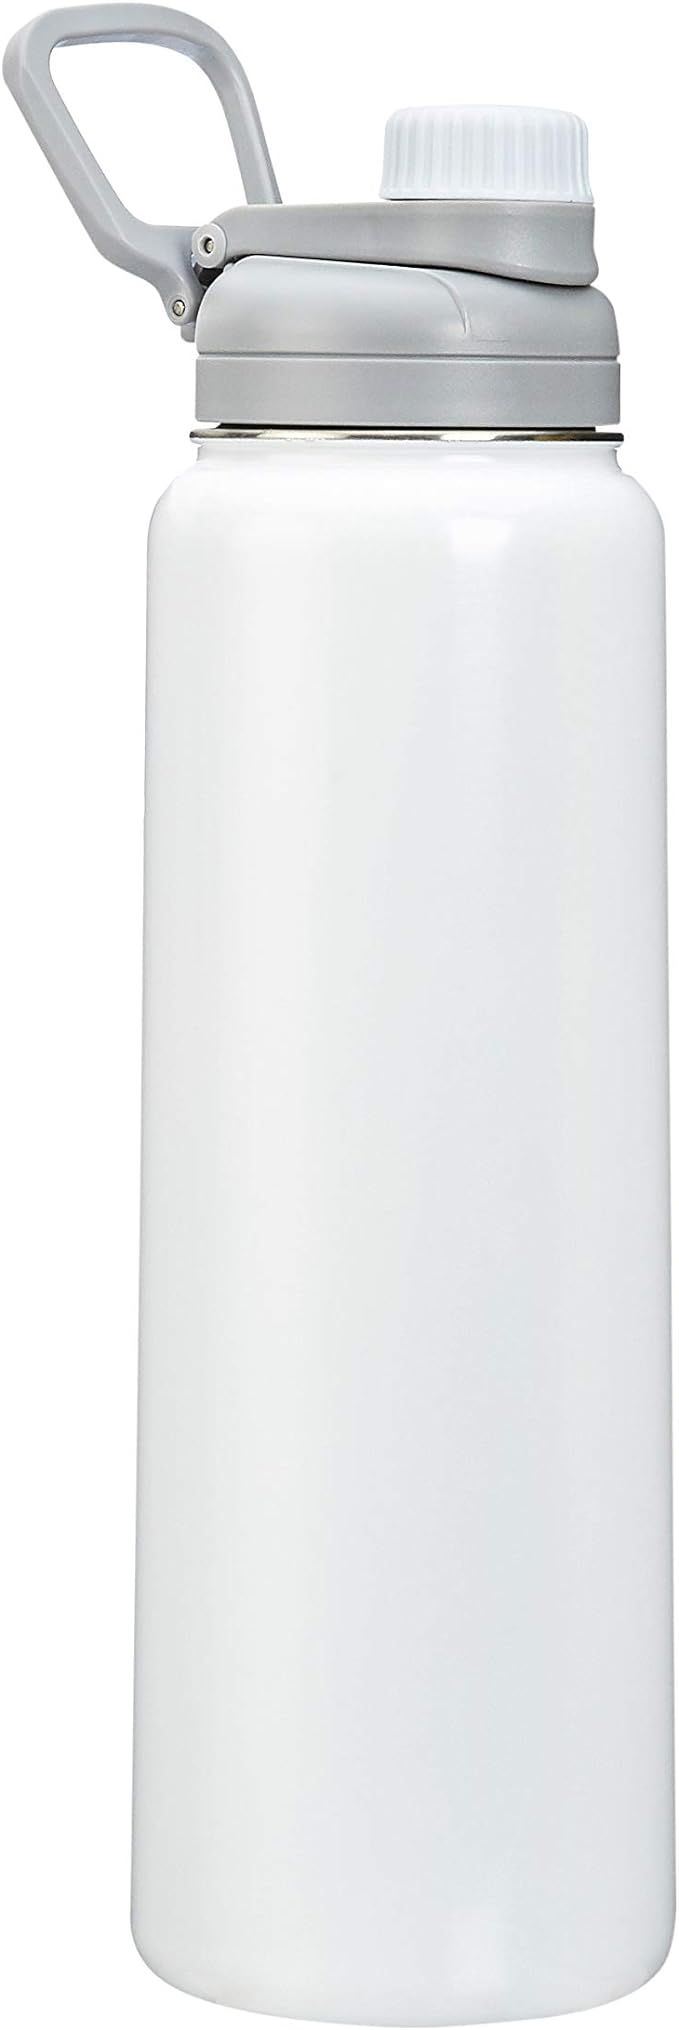 Amazon Basics Stainless Steel Insulated Water Bottle with Spout Lid – 30-Ounce, White | Amazon (US)